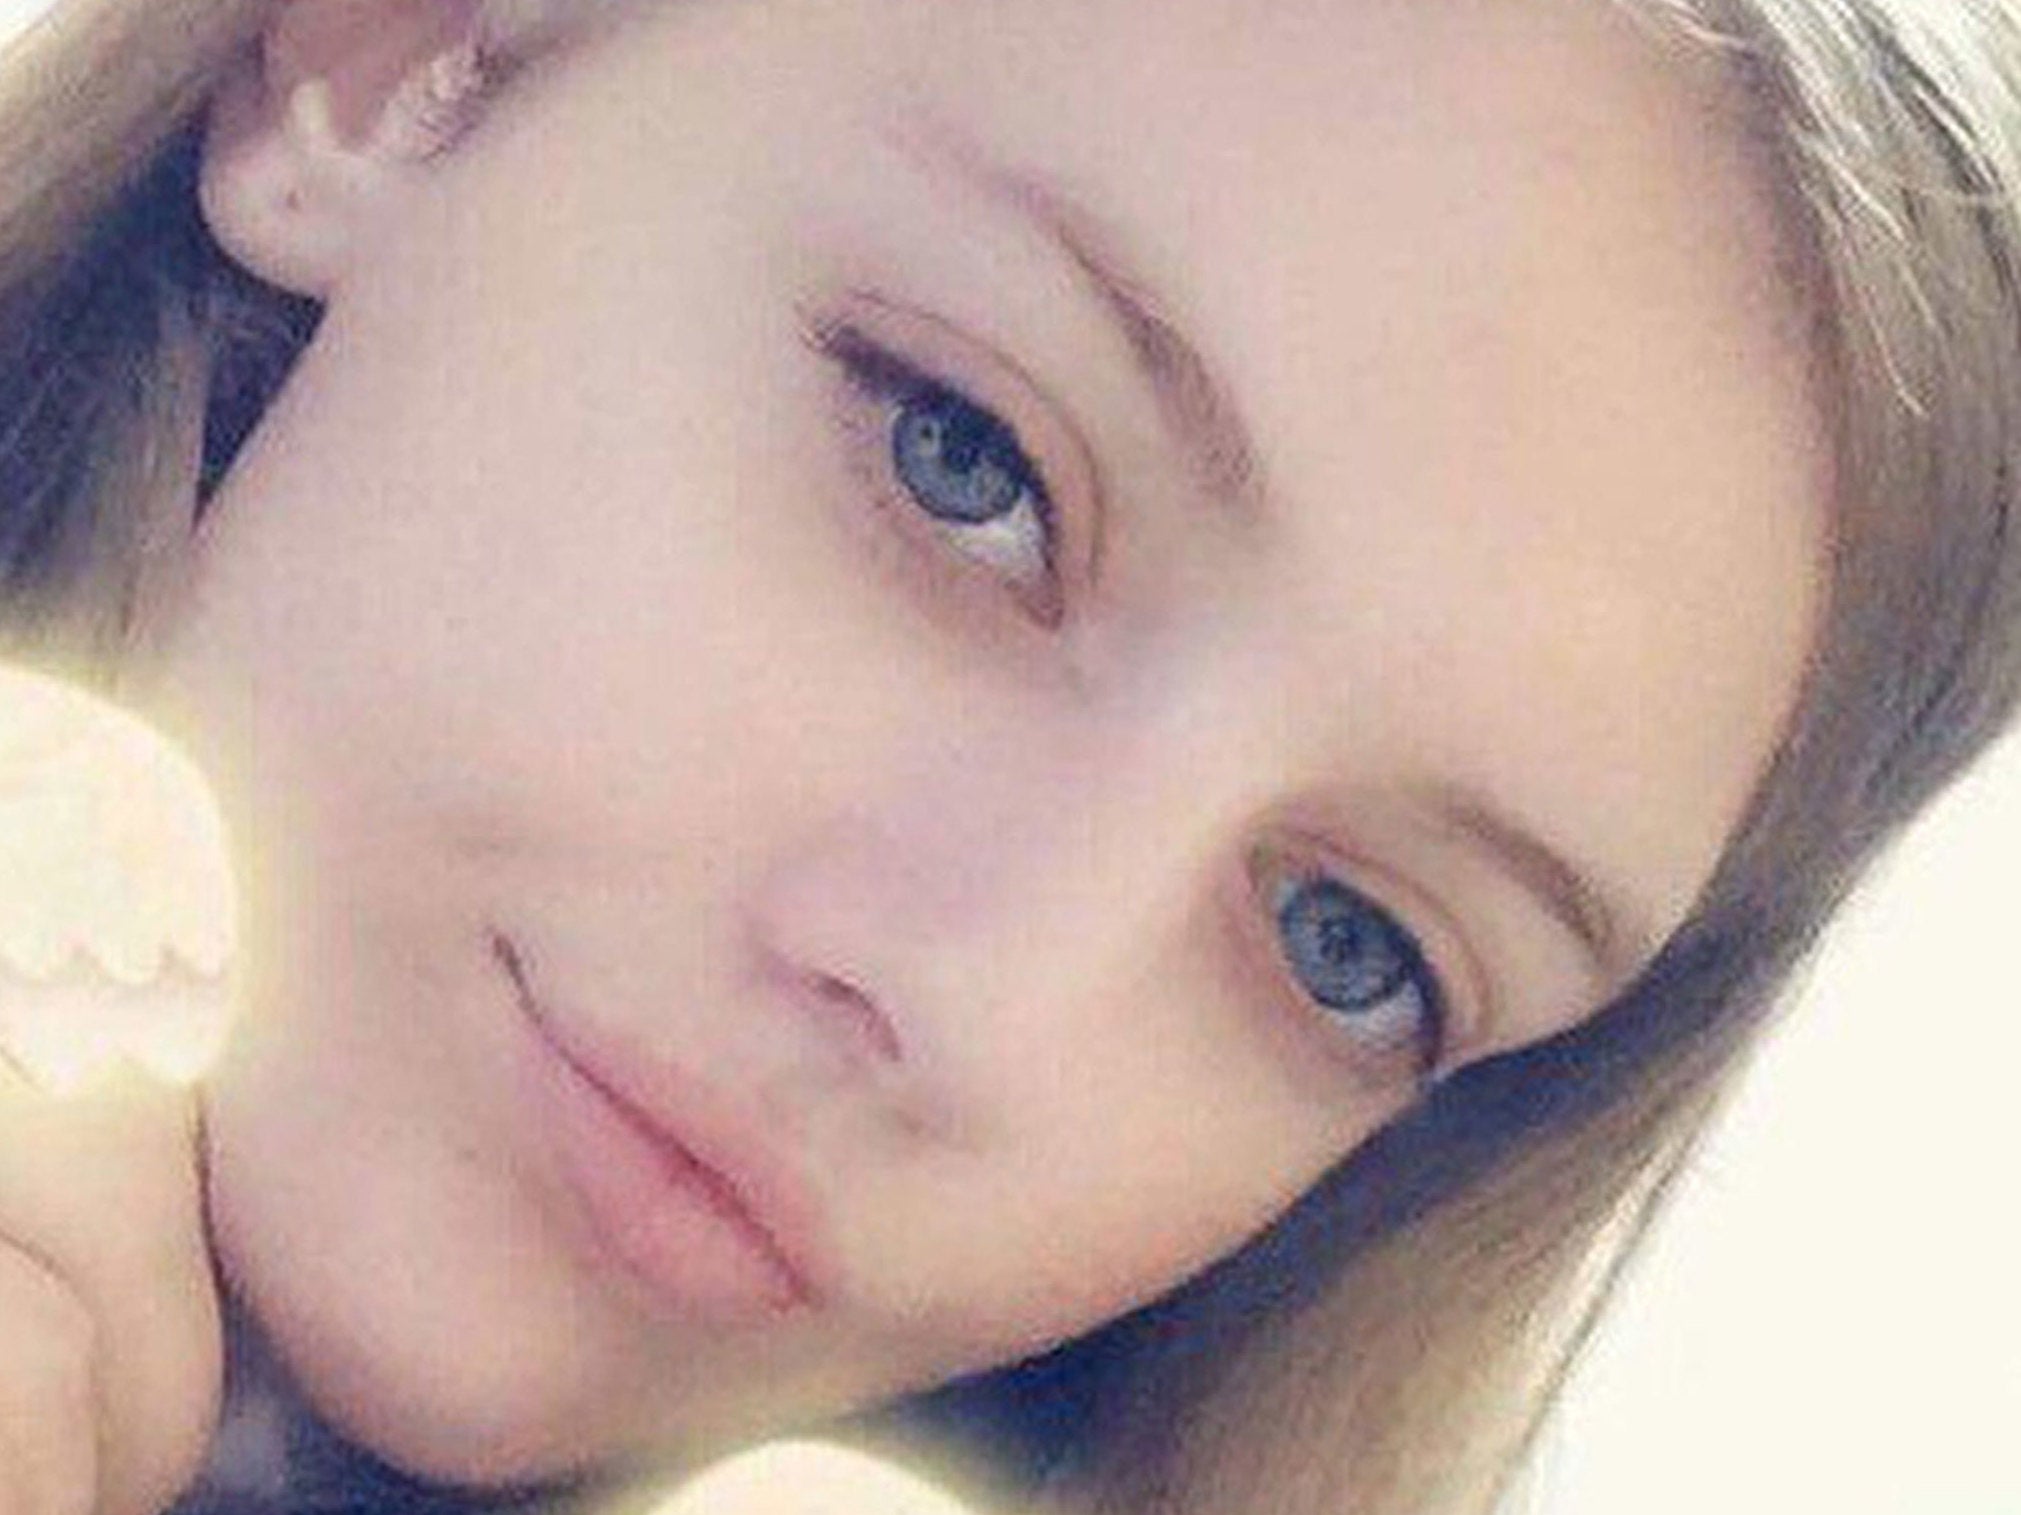 Lucy McHugh was found dead on 26 July, a day after she was last seen by family